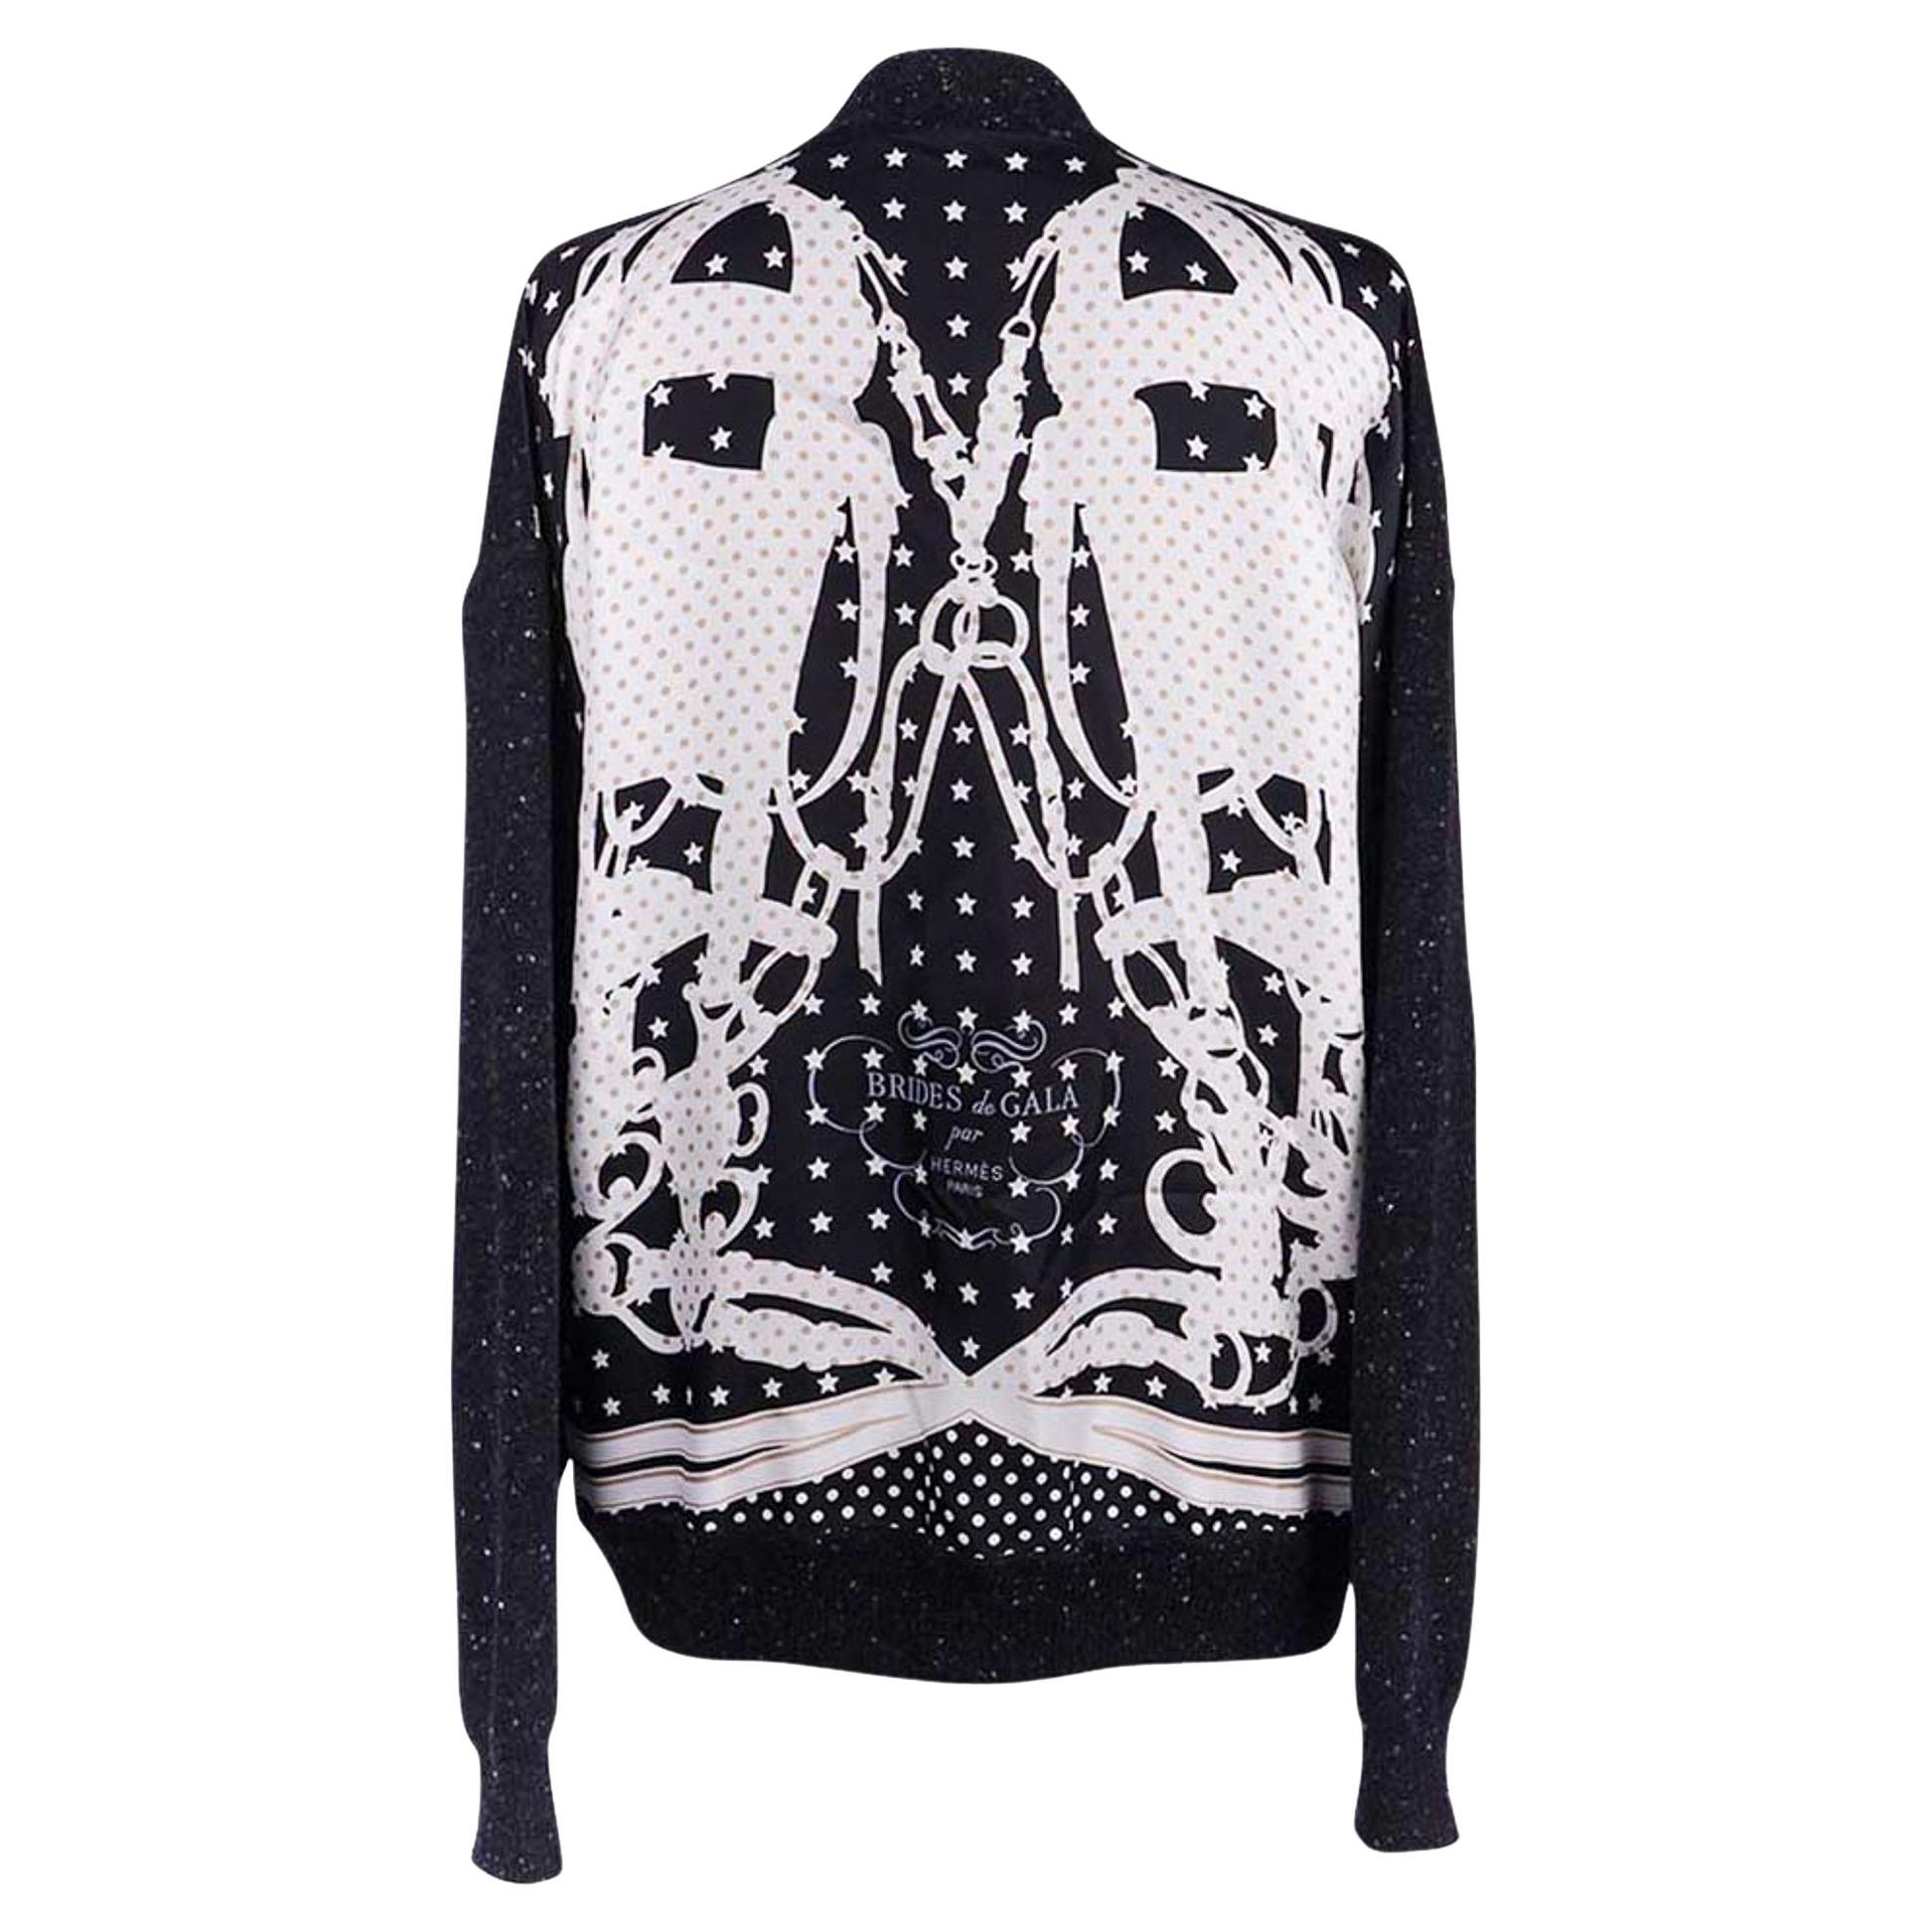 Mightychic offers an Hermes Brides de Gala twillaine V neck cashmere tweed cardigan in Black, White and Gray.
Rear depicts the Brides de Gala in silk, the most popular and recognizable scarf print Hermes has made - Magnificent!
Drop shoulder.
3